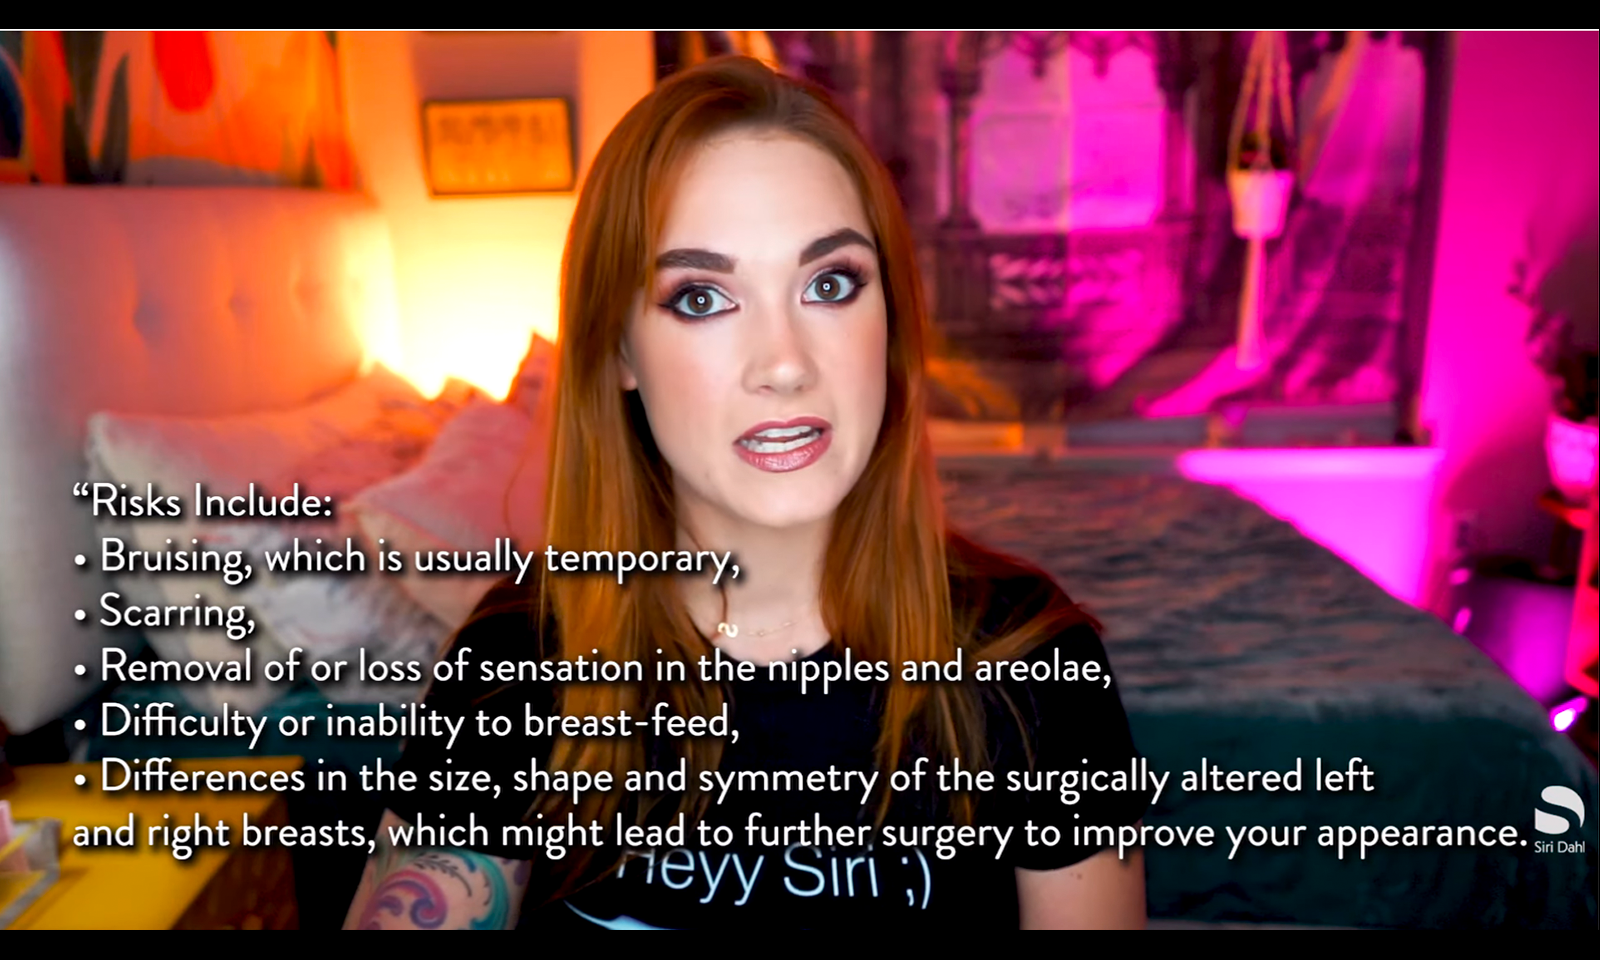 Siri Dahl Addresses Her Breast Reduction Surgery in YouTube Video